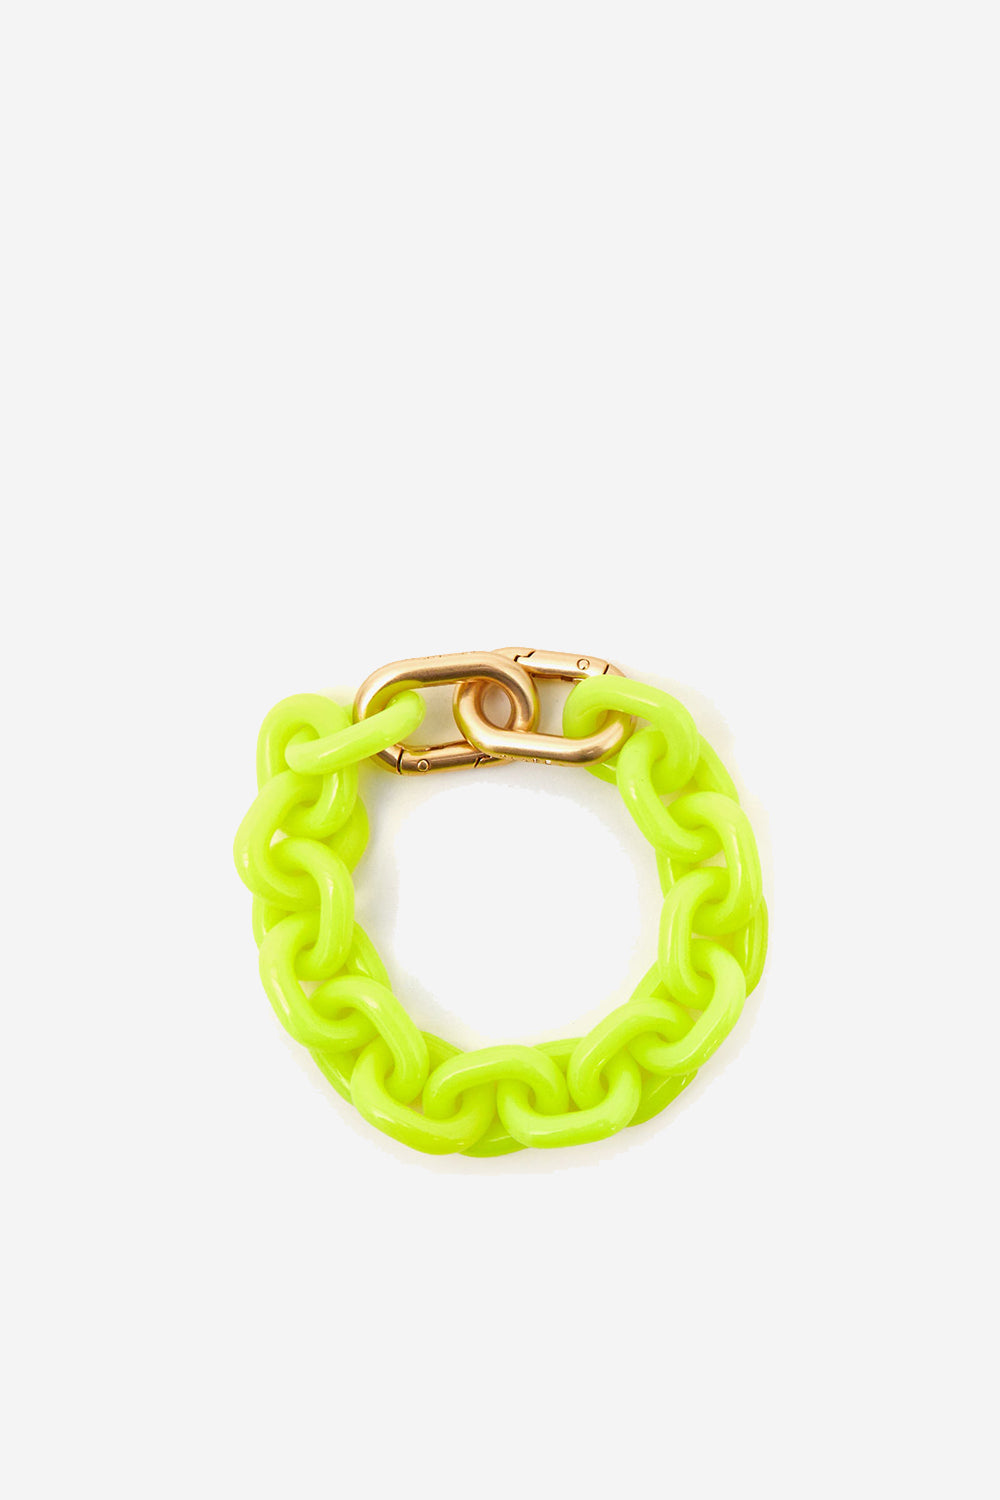 Clare V, Bags, Clare V Shortie Strap Neon Yellow Resin